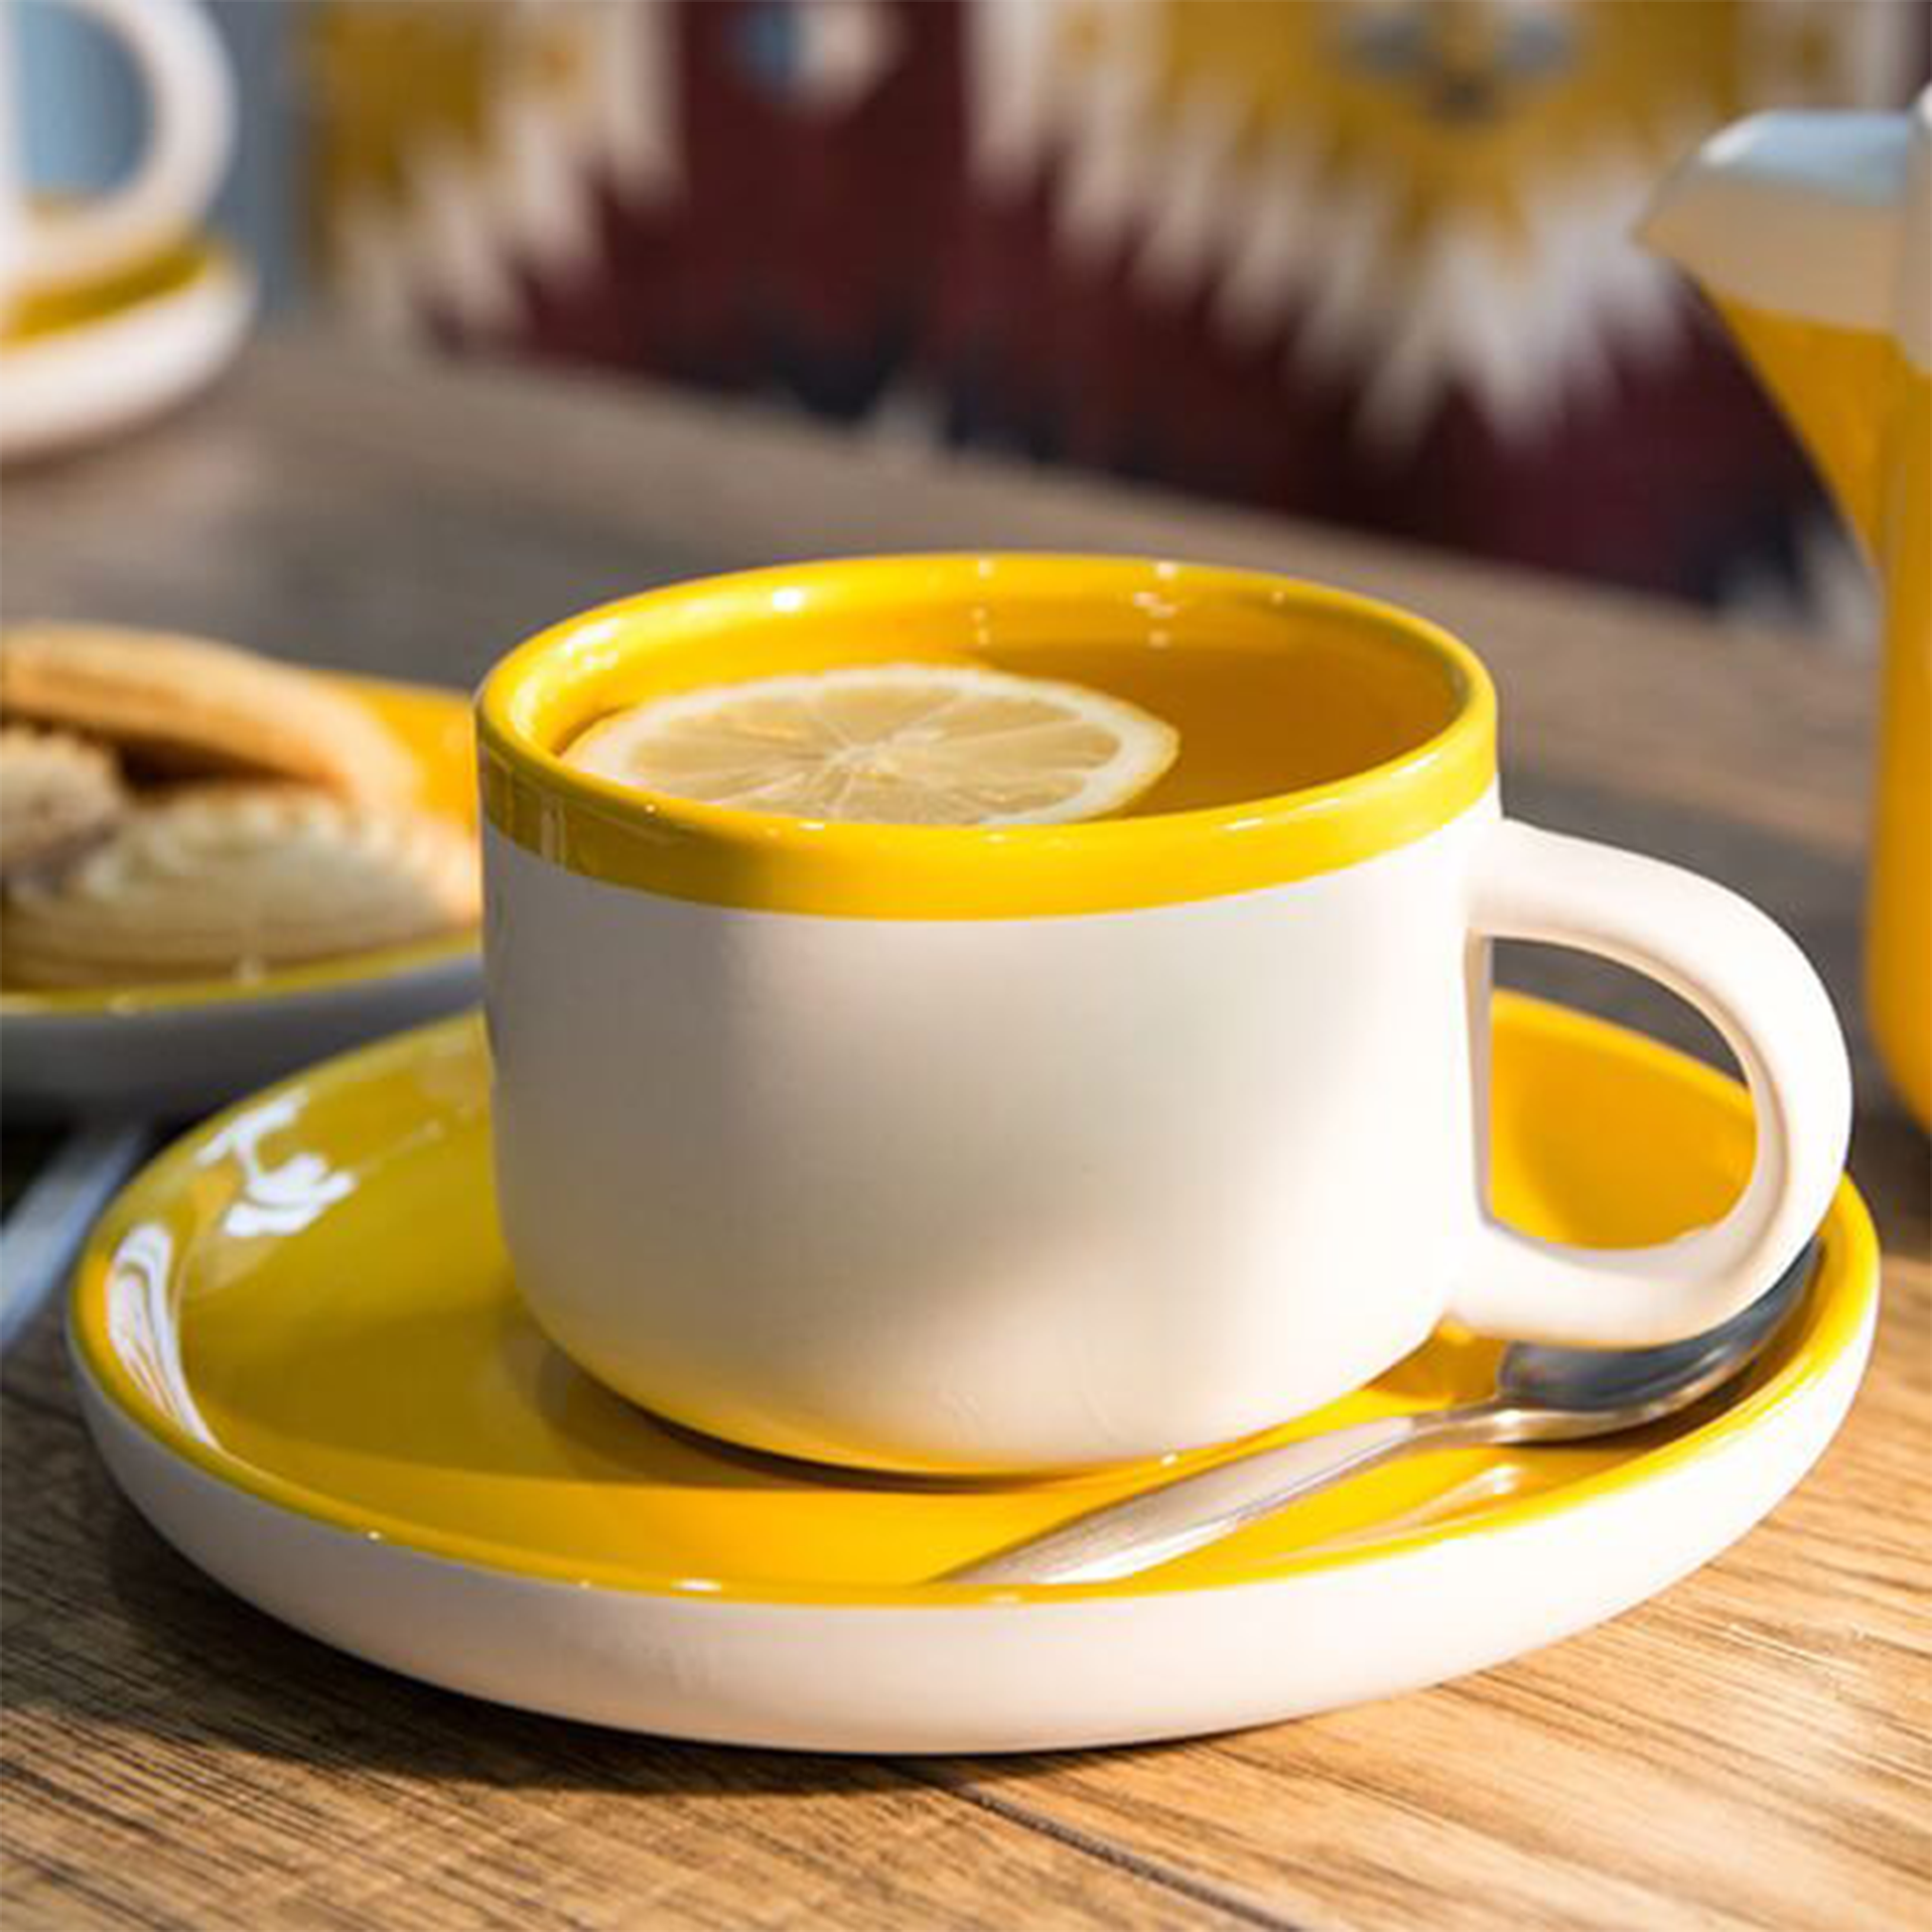 the tea cup and saucer displayed with the cup full of tea with a slice of lemon